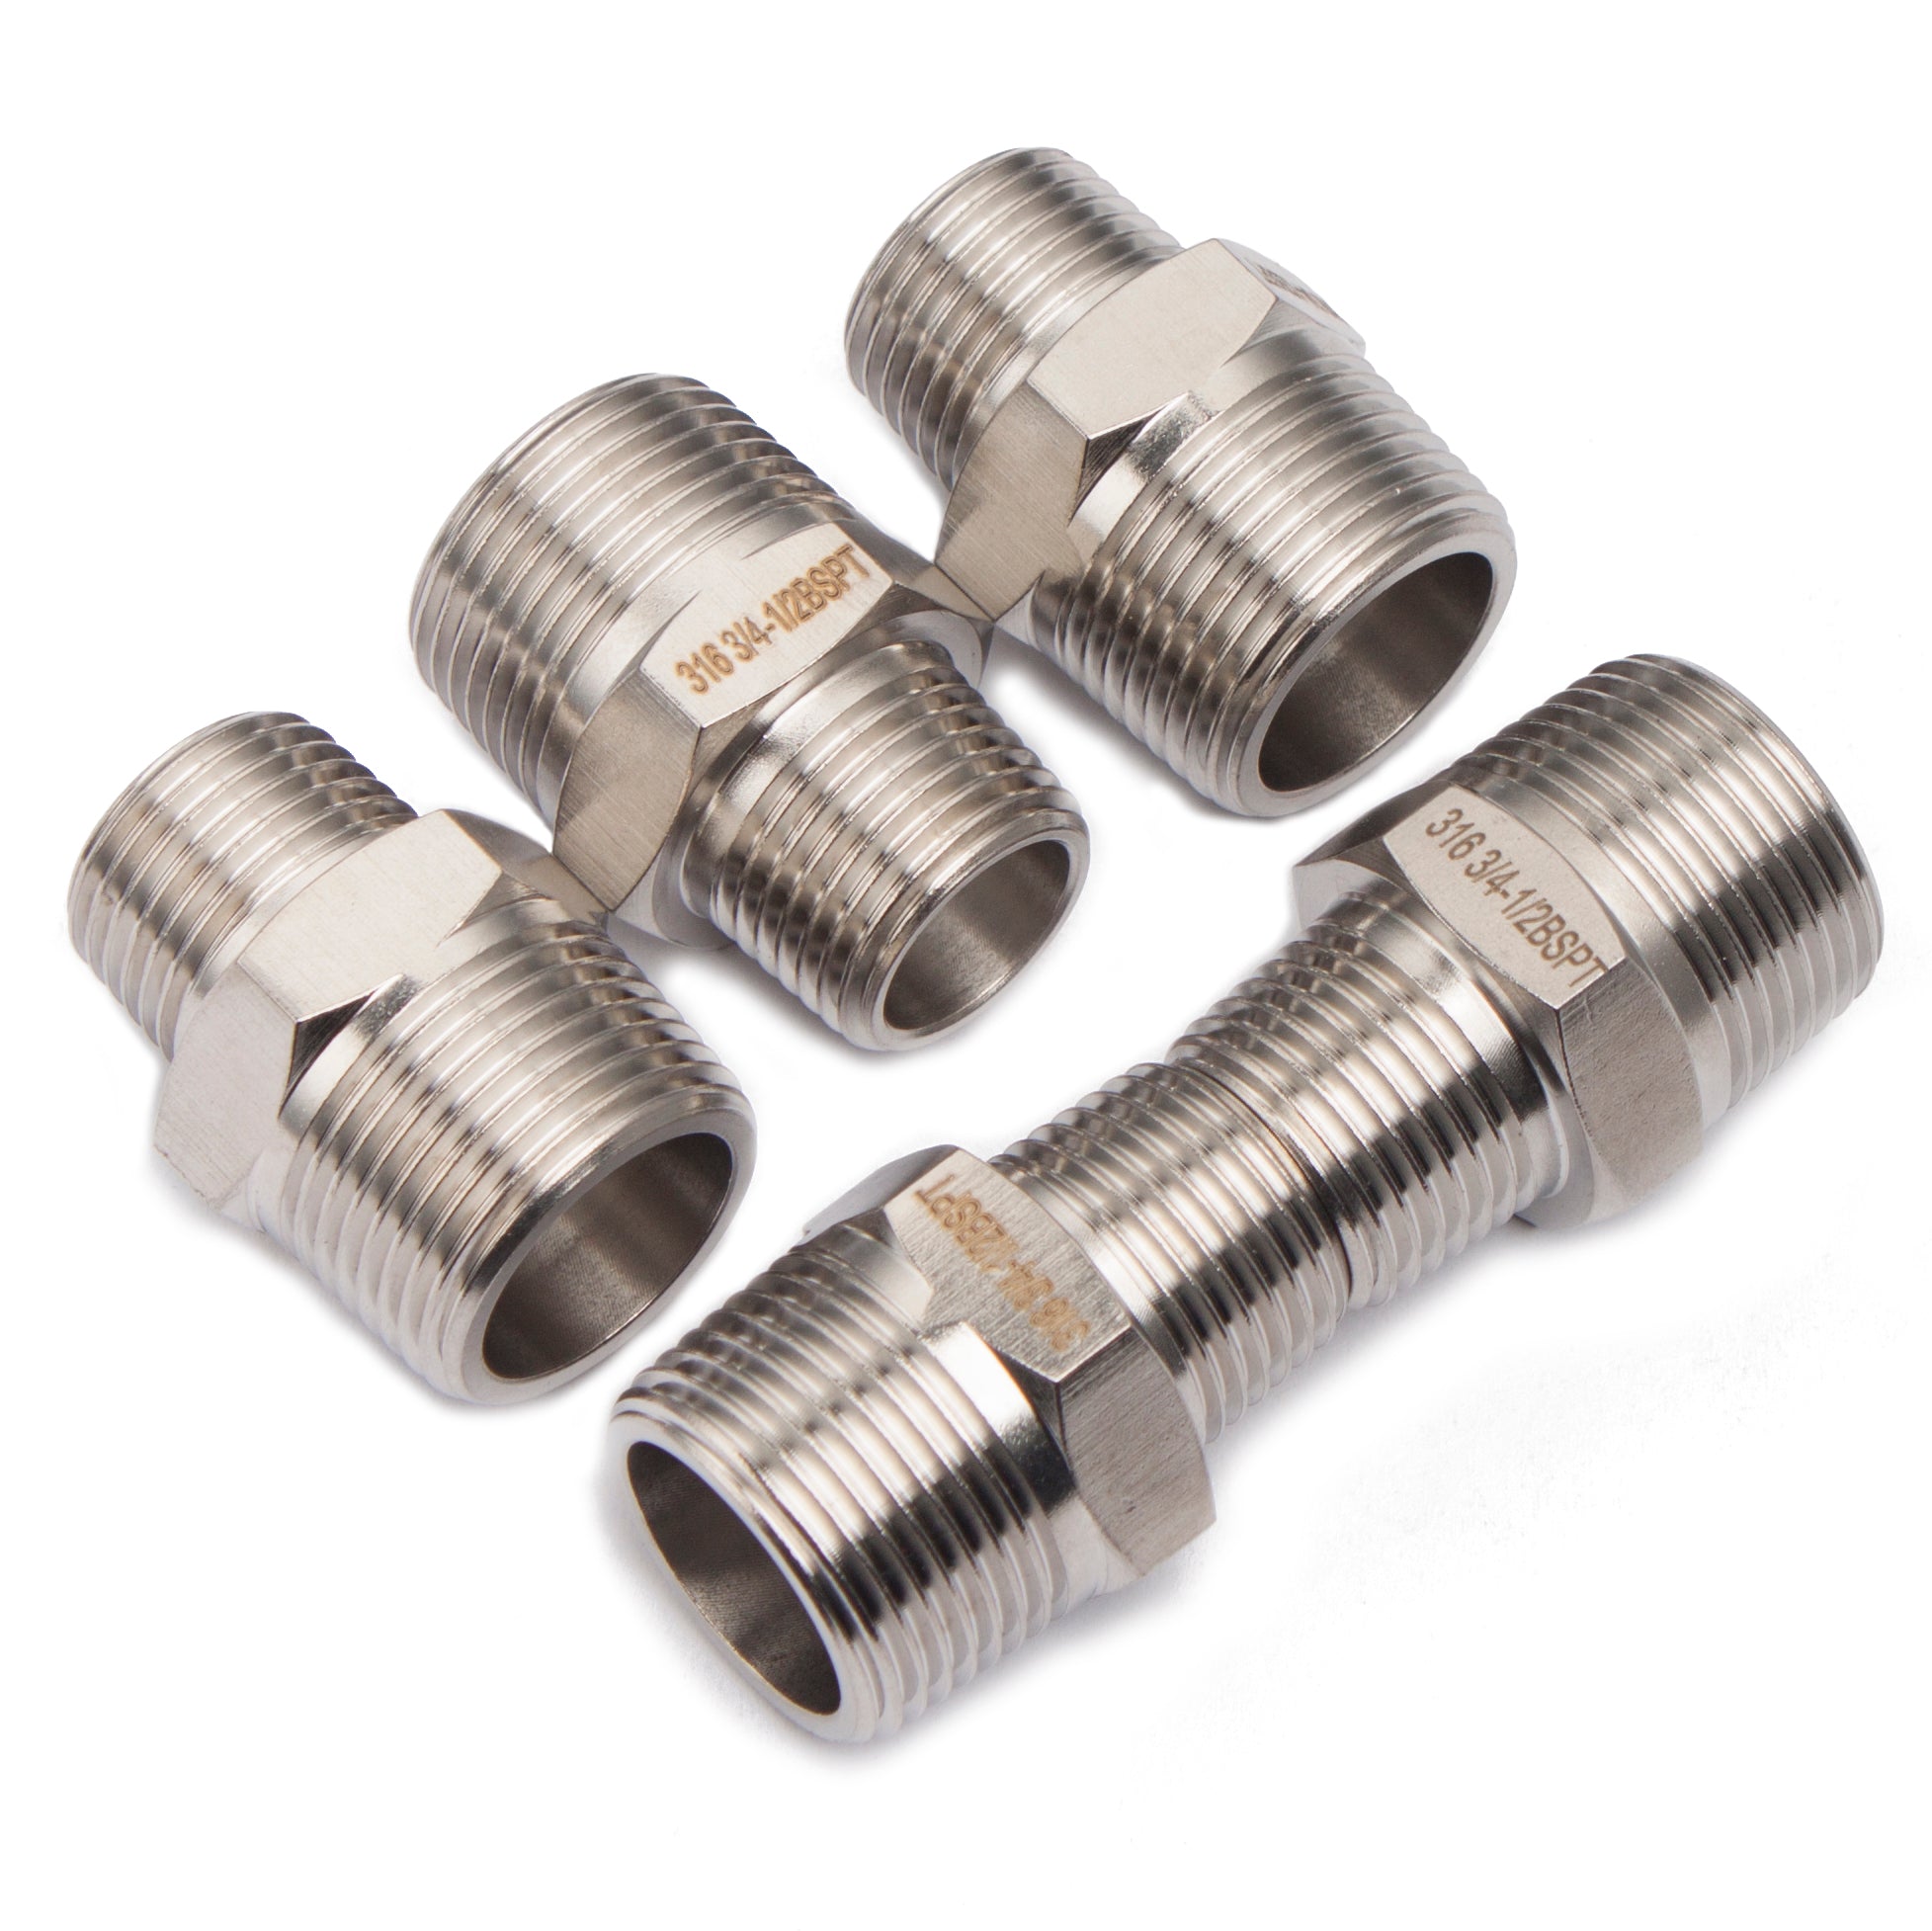 LTWFITTING Stainless Steel 316 Pipe Hex Reducing Nipple Fitting 3/4 -Inch x 1/2 -Inch Male BSPT (Pack of 5)